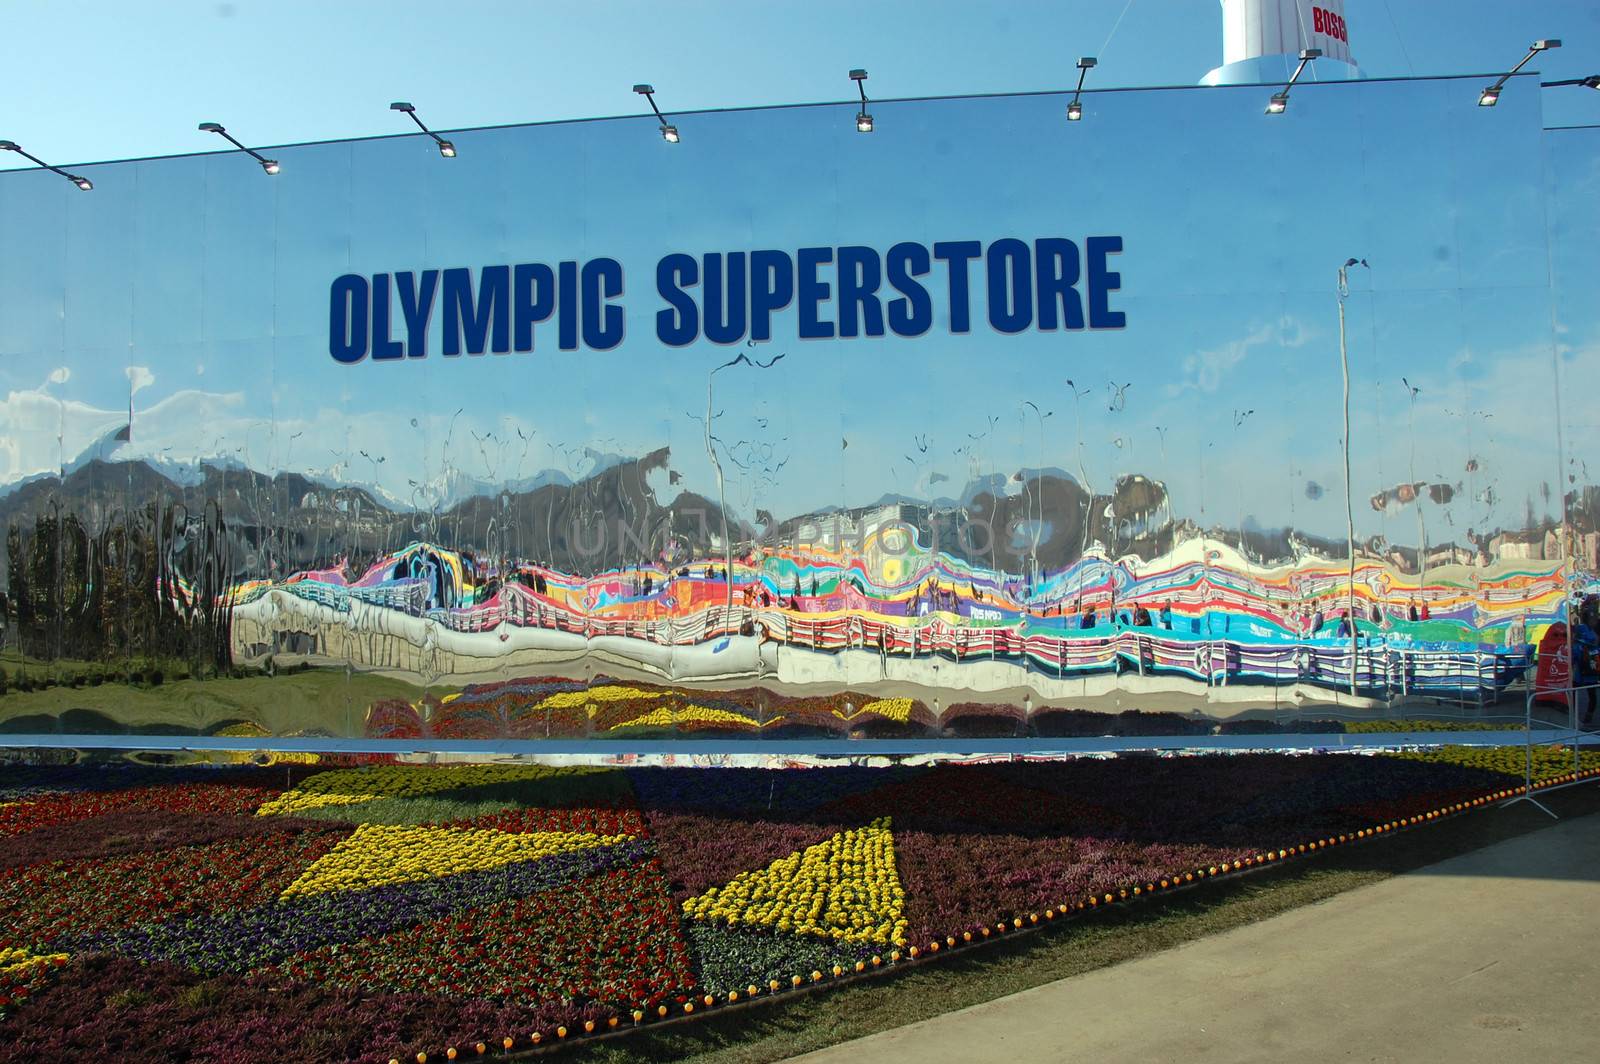 Olympic surerstore mirror wall at XXII Winter Olympic Games Sochi 2014, Russia, 15.02.2014